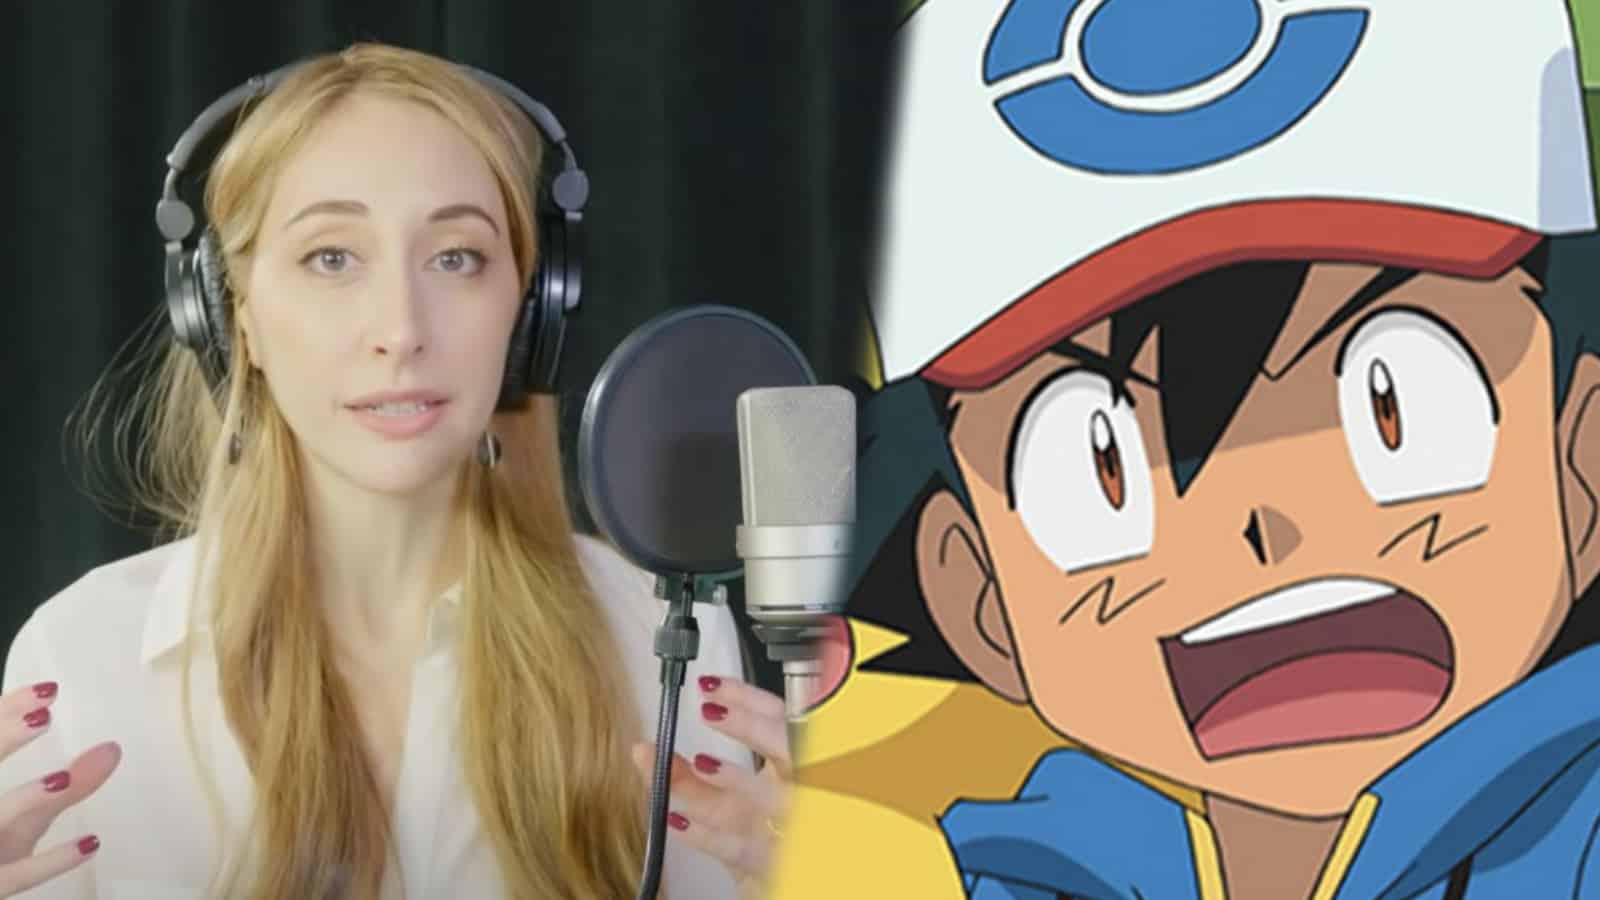 Original English voice actor for Ash in the Pokemon anime comments